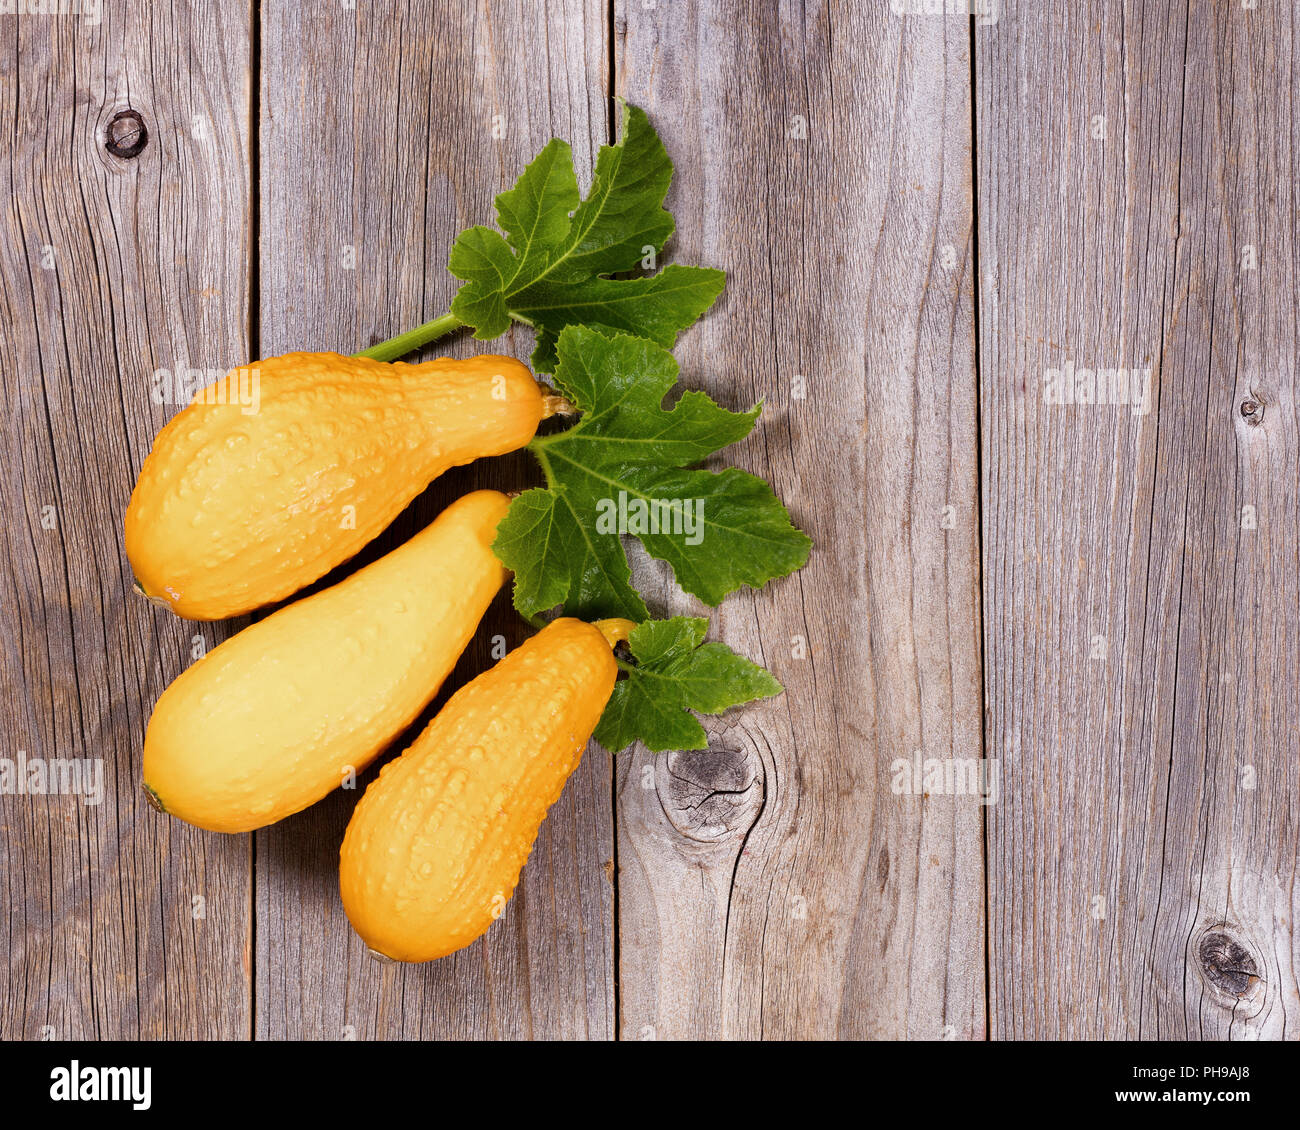 Seasonal autumn squash vegetables on rustic wooden boards Stock Photo